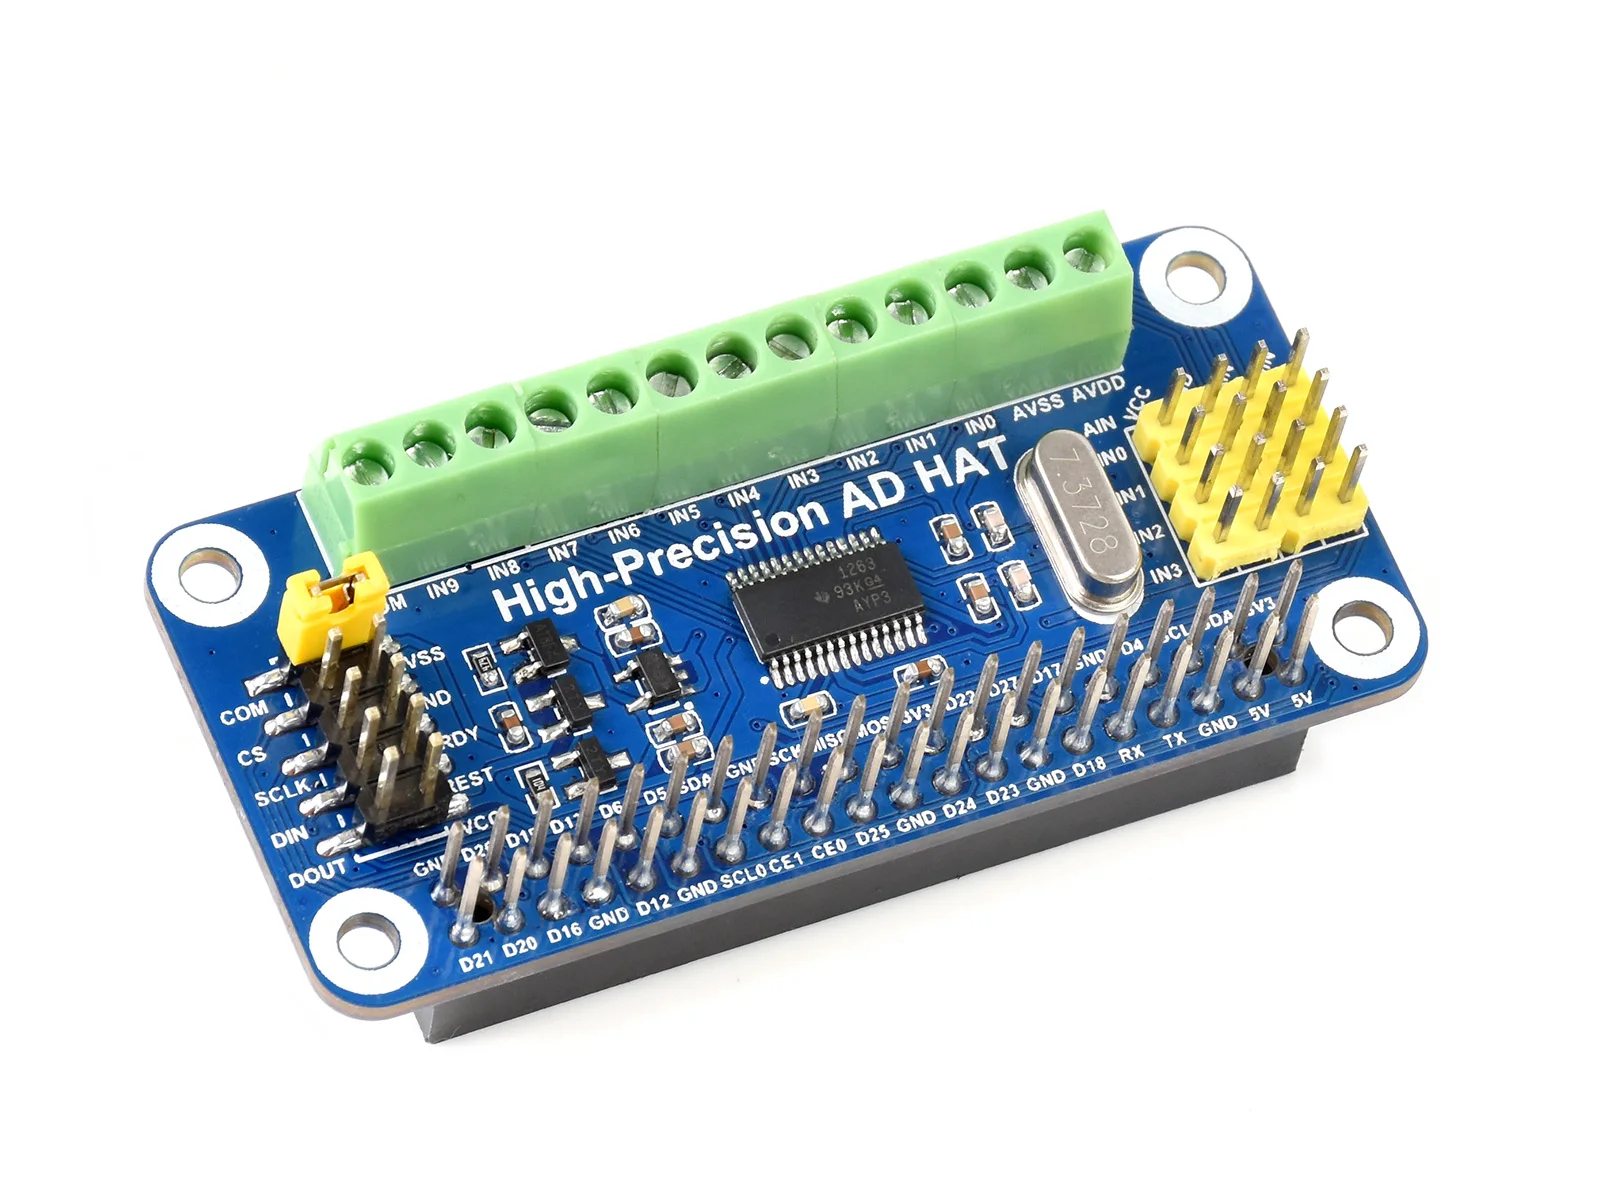 

Waveshare High-Precision AD HAT For Raspberry Pi and Jetson Nano, ADS1263 10-Ch 32-Bit ADC